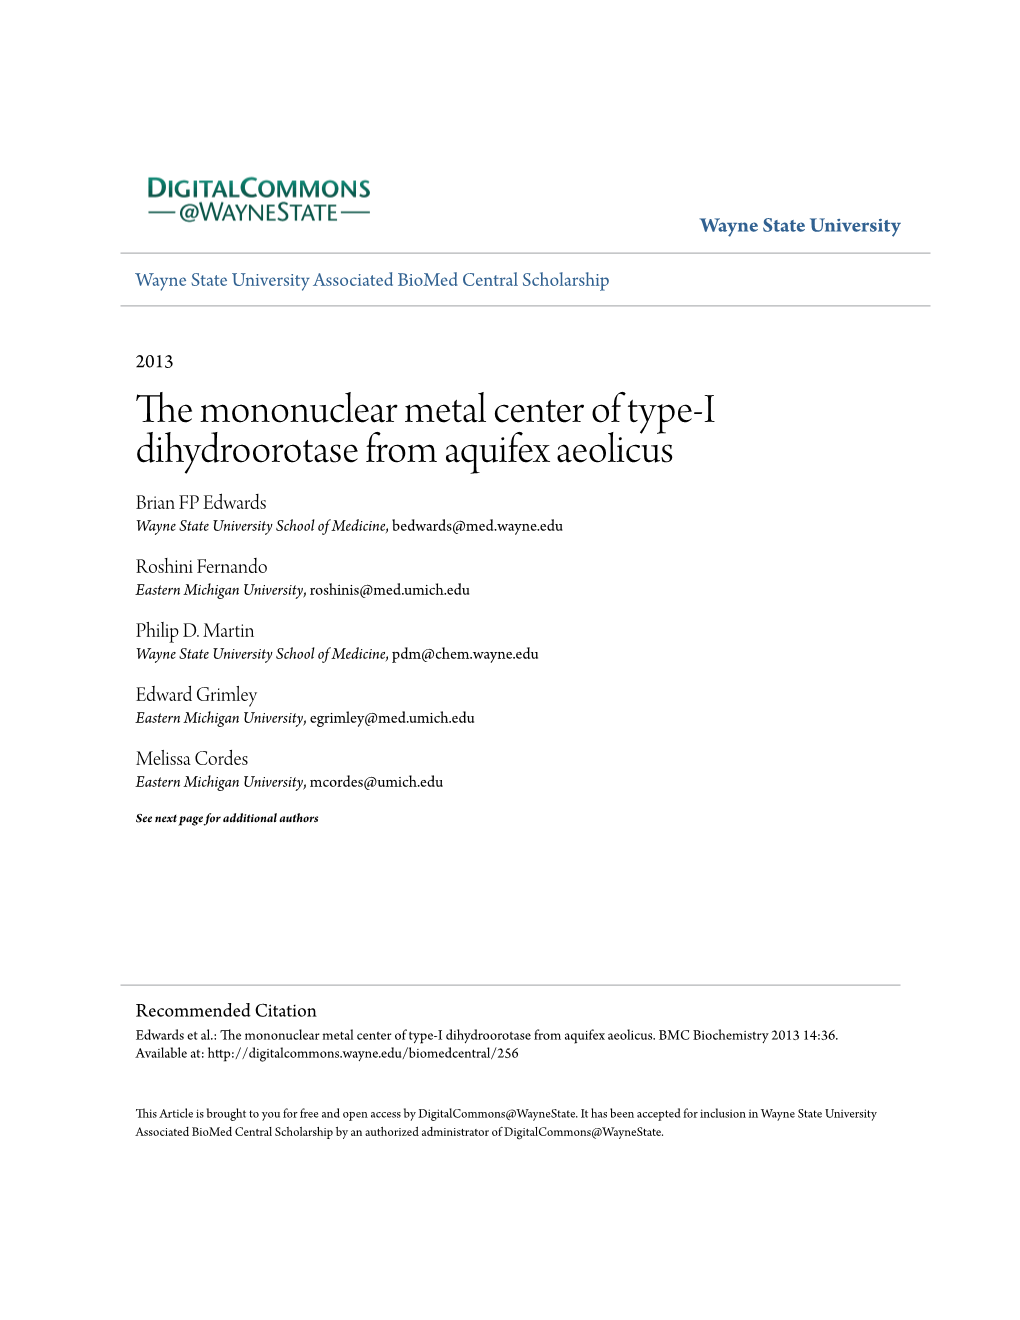 The Mononuclear Metal Center of Type-I Dihydroorotase from Aquifex Aeolicus Brian FP Edwards Wayne State University School of Medicine, Bedwards@Med.Wayne.Edu